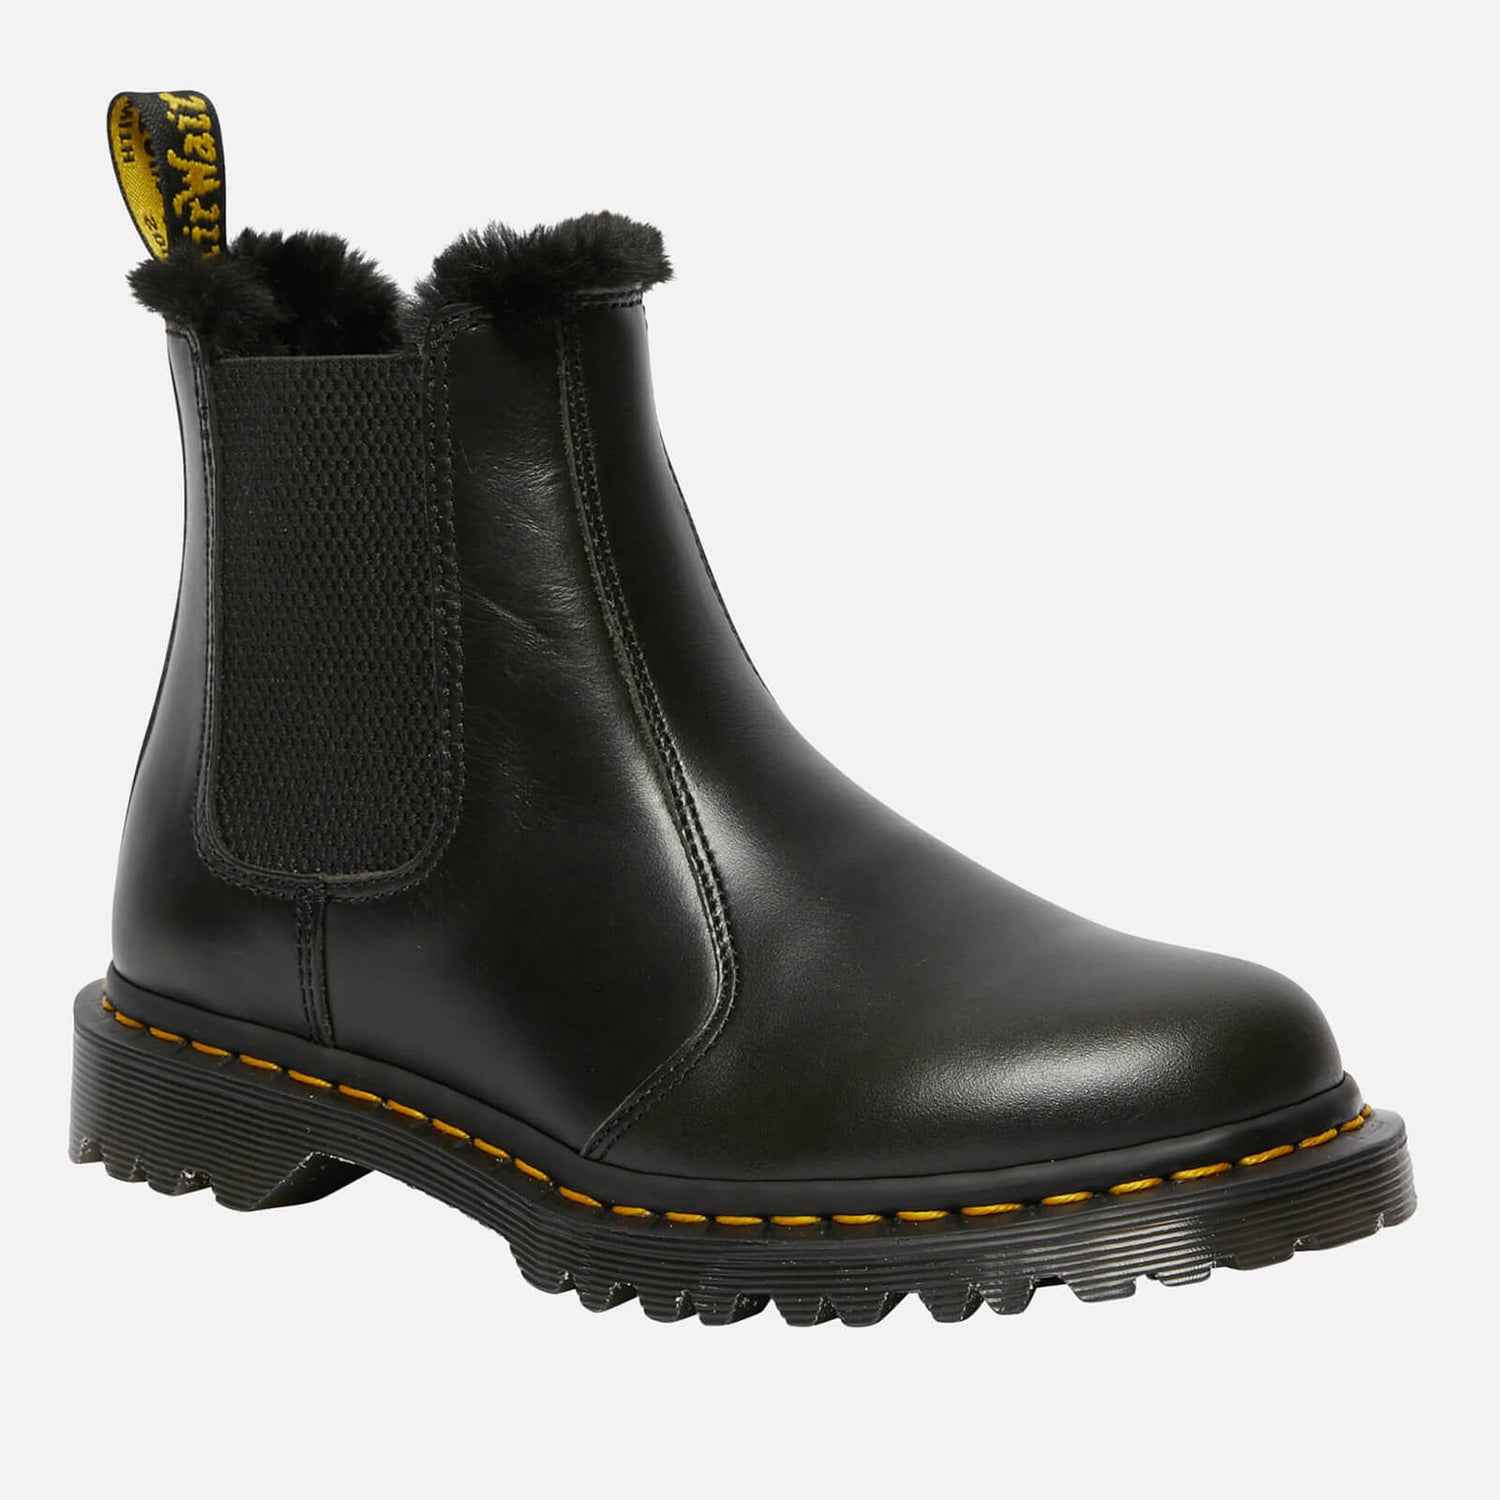 Dr. Martens Women's 2976 Leonore Fur Lined Leather Chelsea Boots - Dark Grey - UK 3